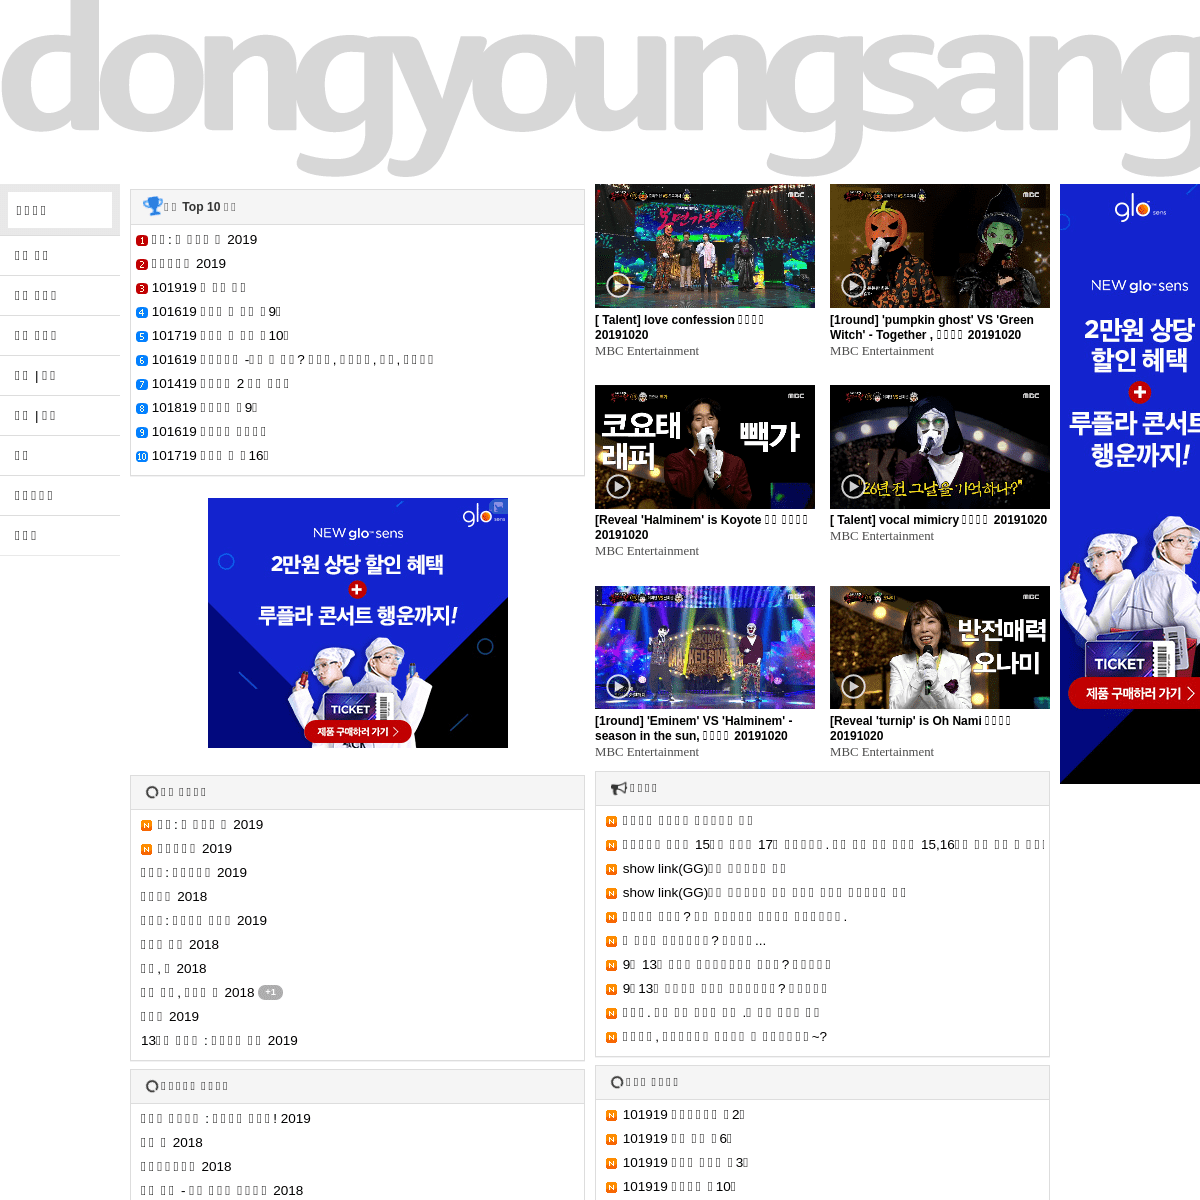 A complete backup of baykoreans.net